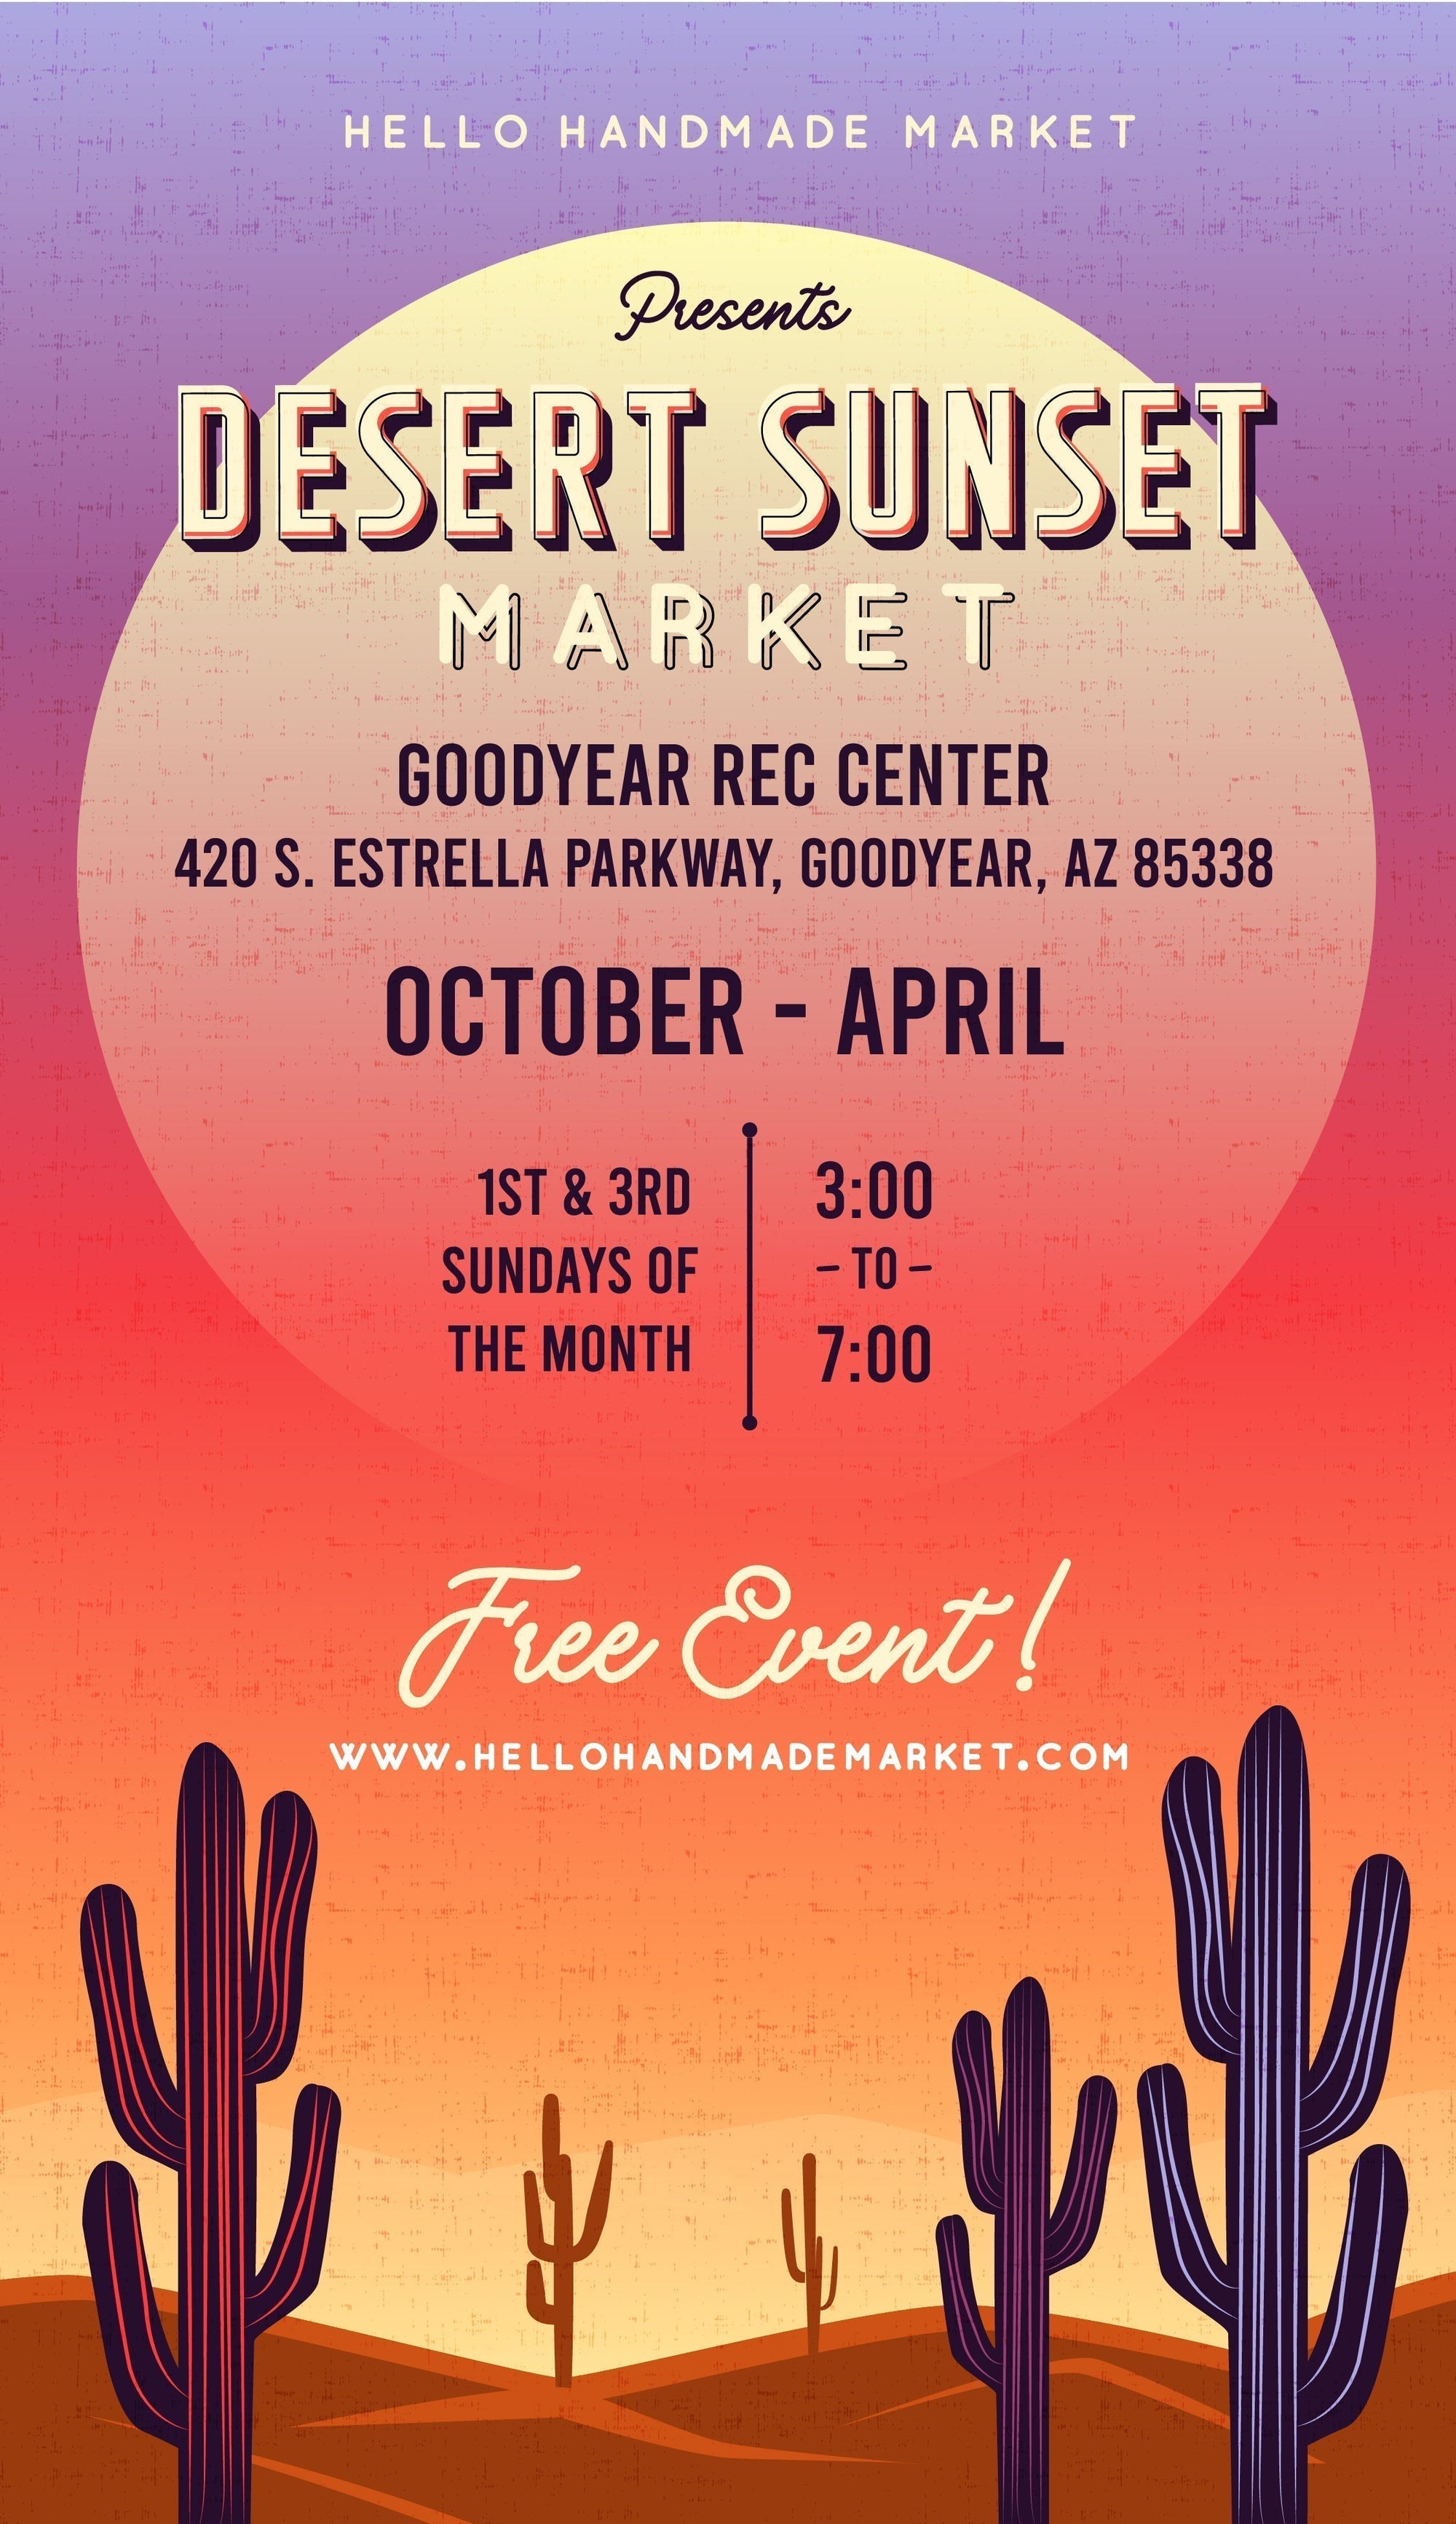 Be a Vendor on March 16, 2025 for the Desert Sunset Market at the Goodyear Recreation Center